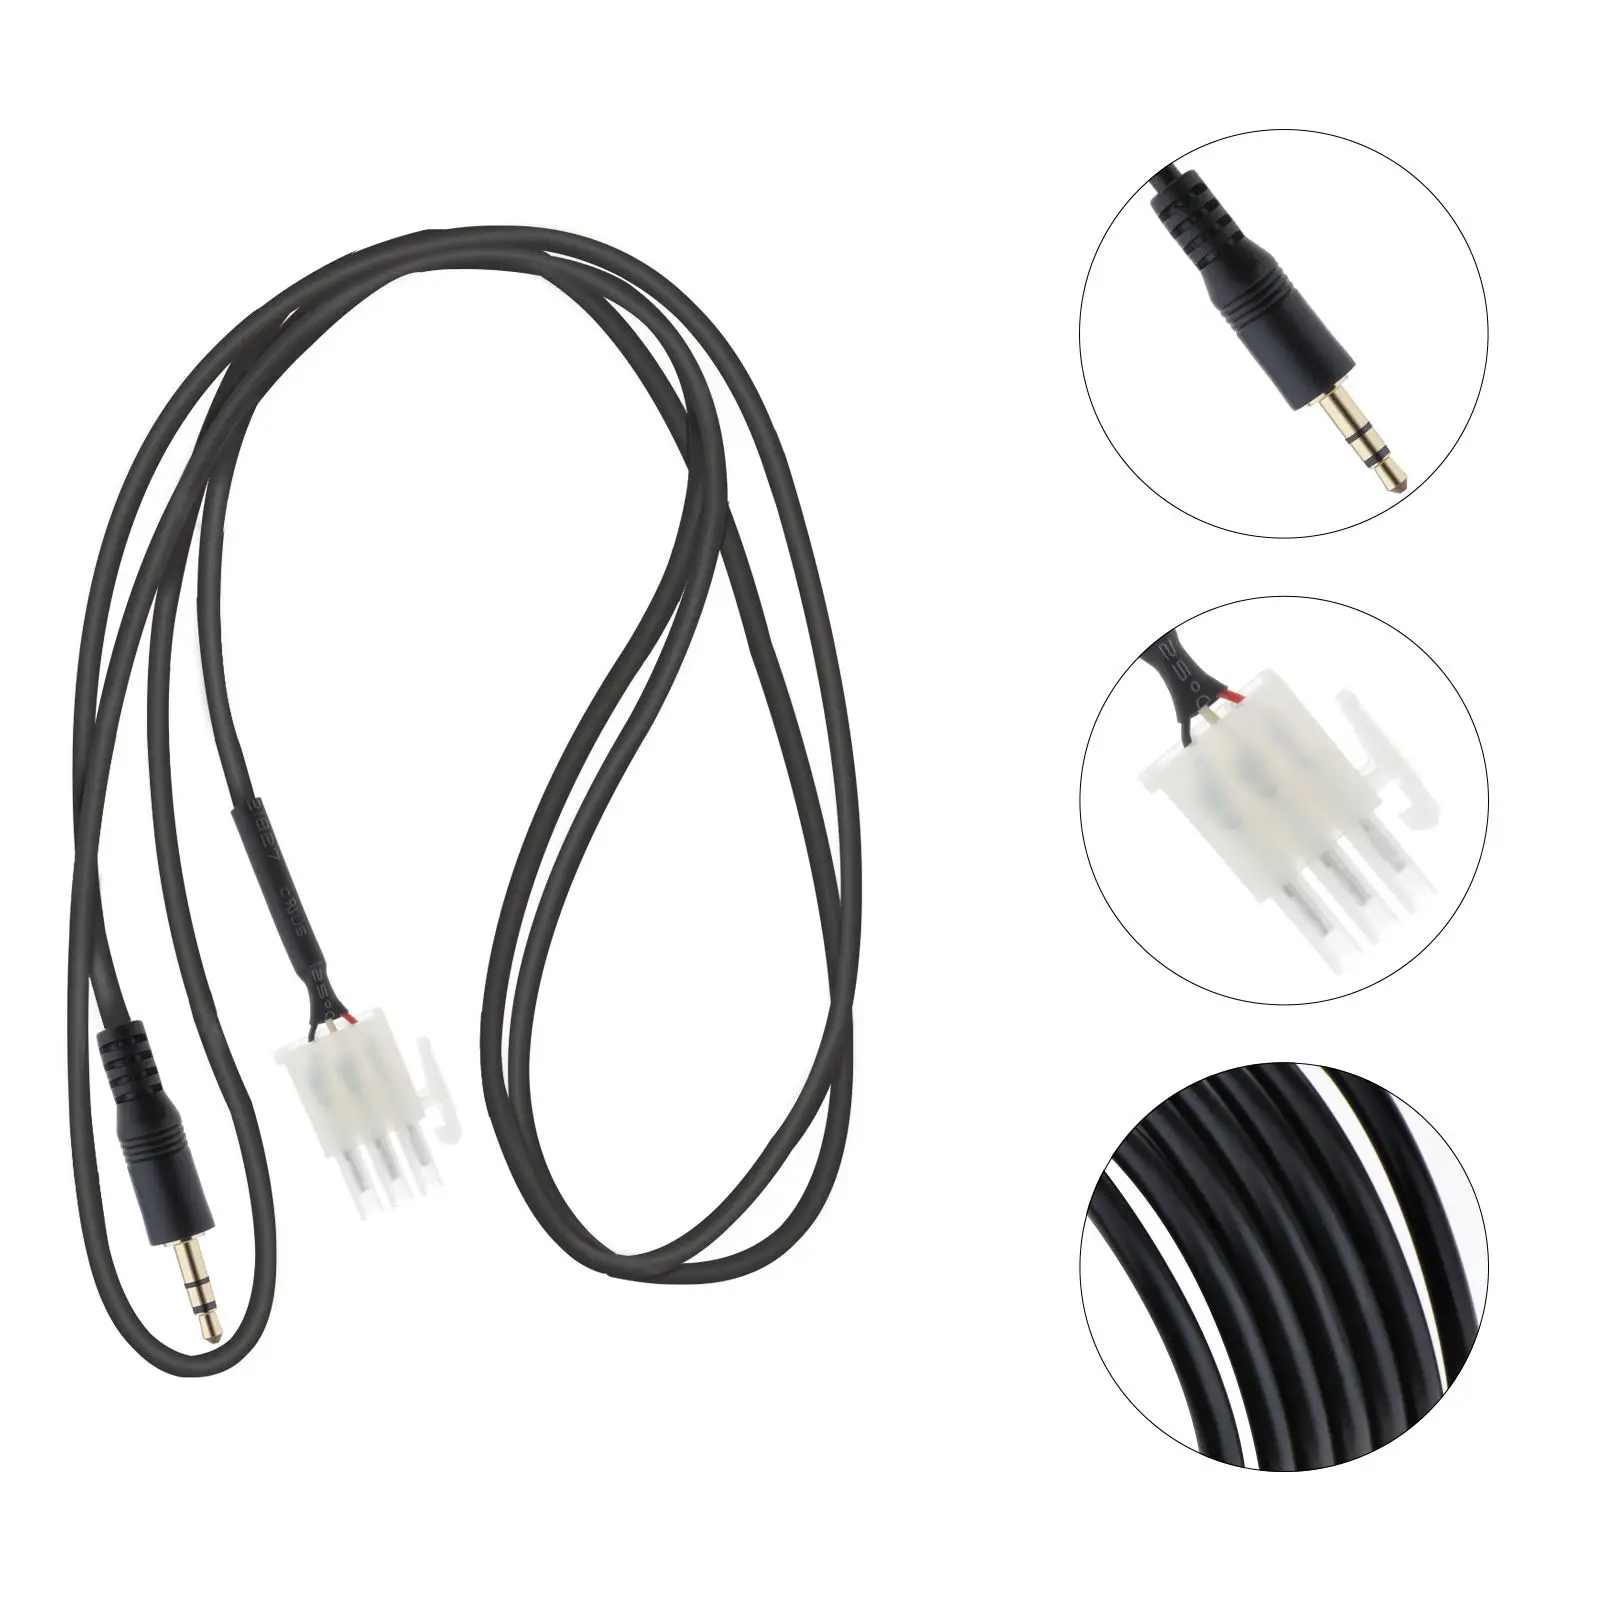 3.5mm Audio Cable Aux Cord Male Adapter 3 Pin Fit for  GL1800 Goldwing